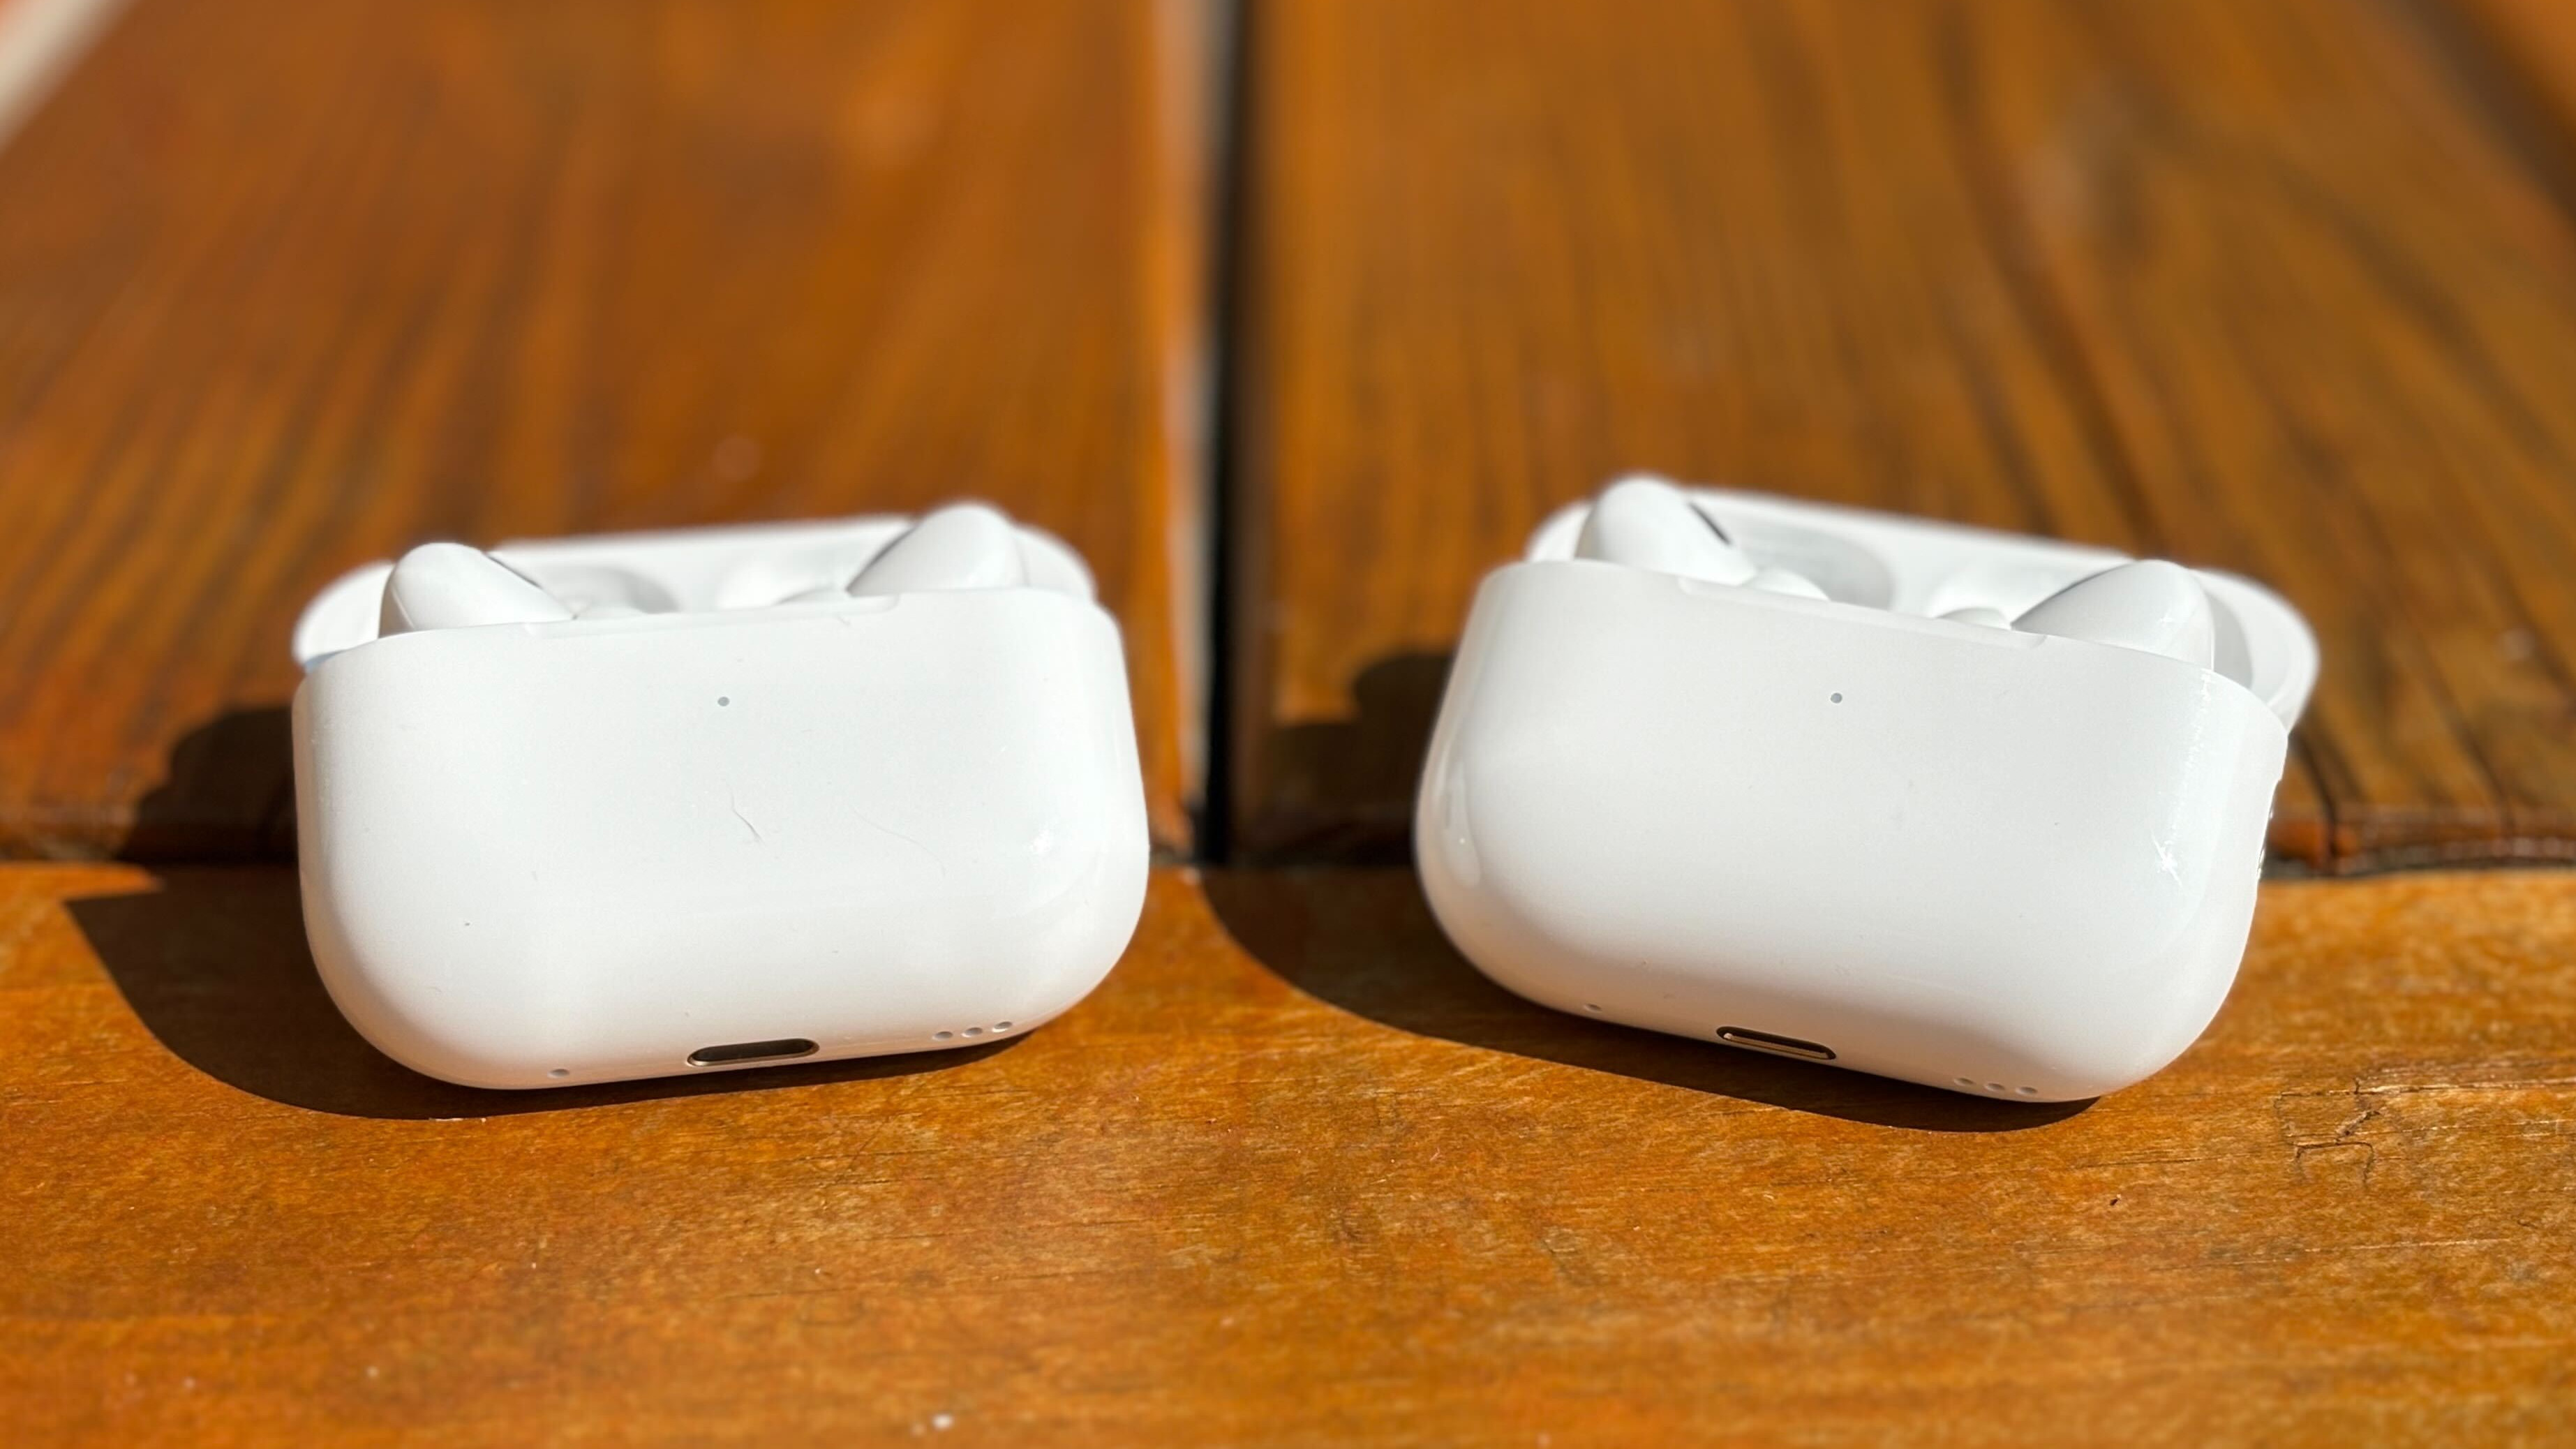 Apple AirPods Pro 2 vs. AirPods Pro: What's new?